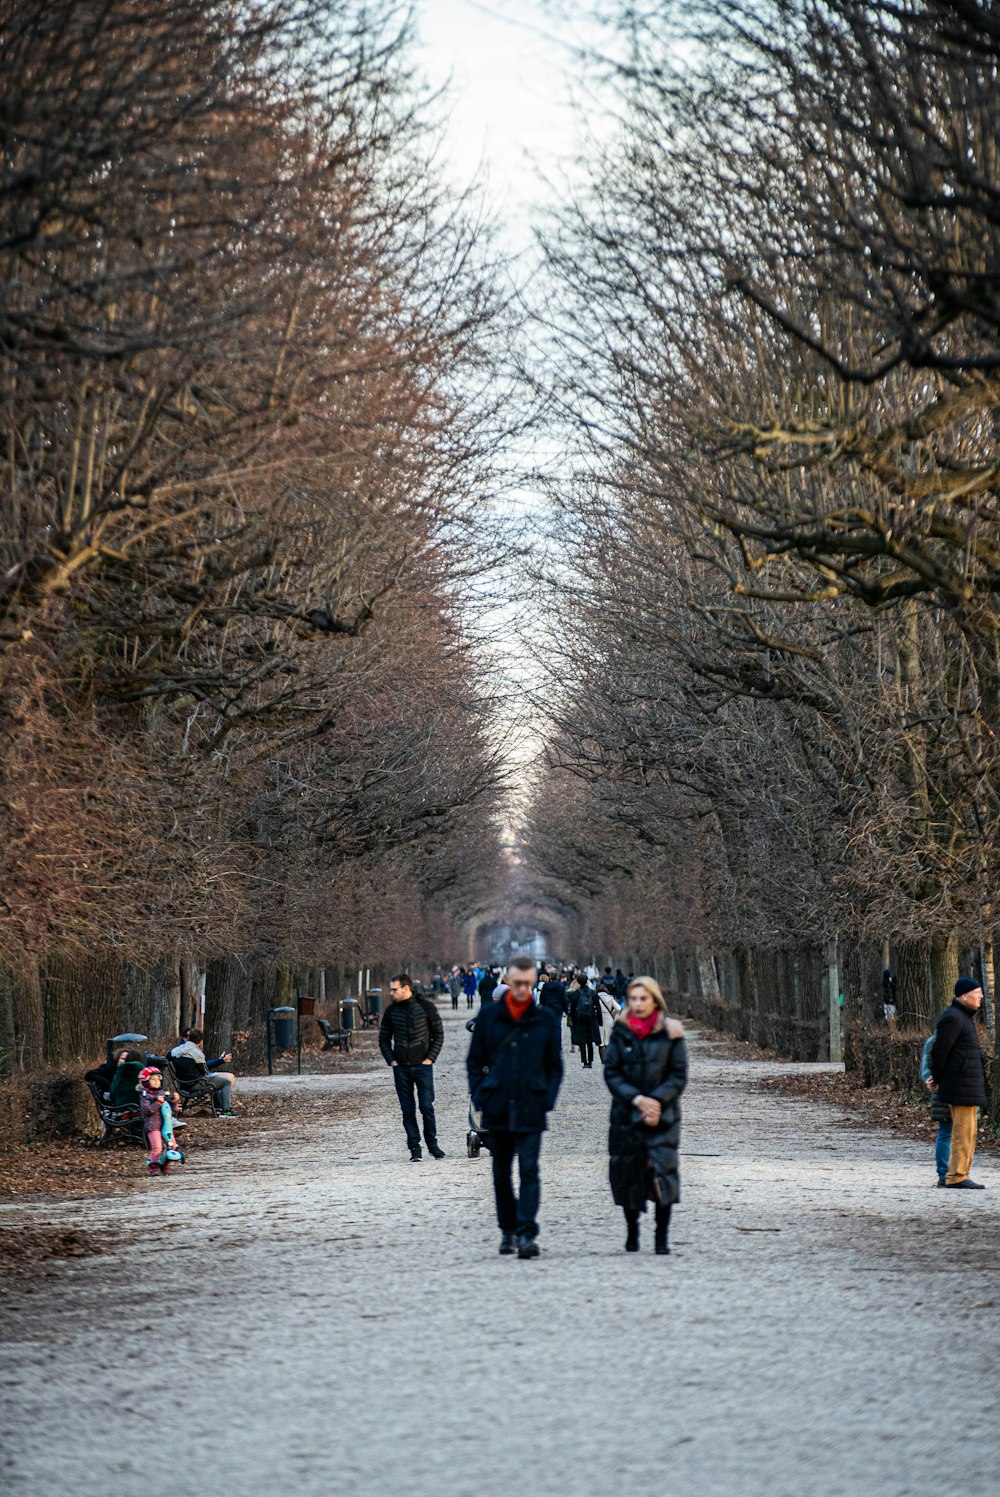 a group of people walking down a street lined with trees